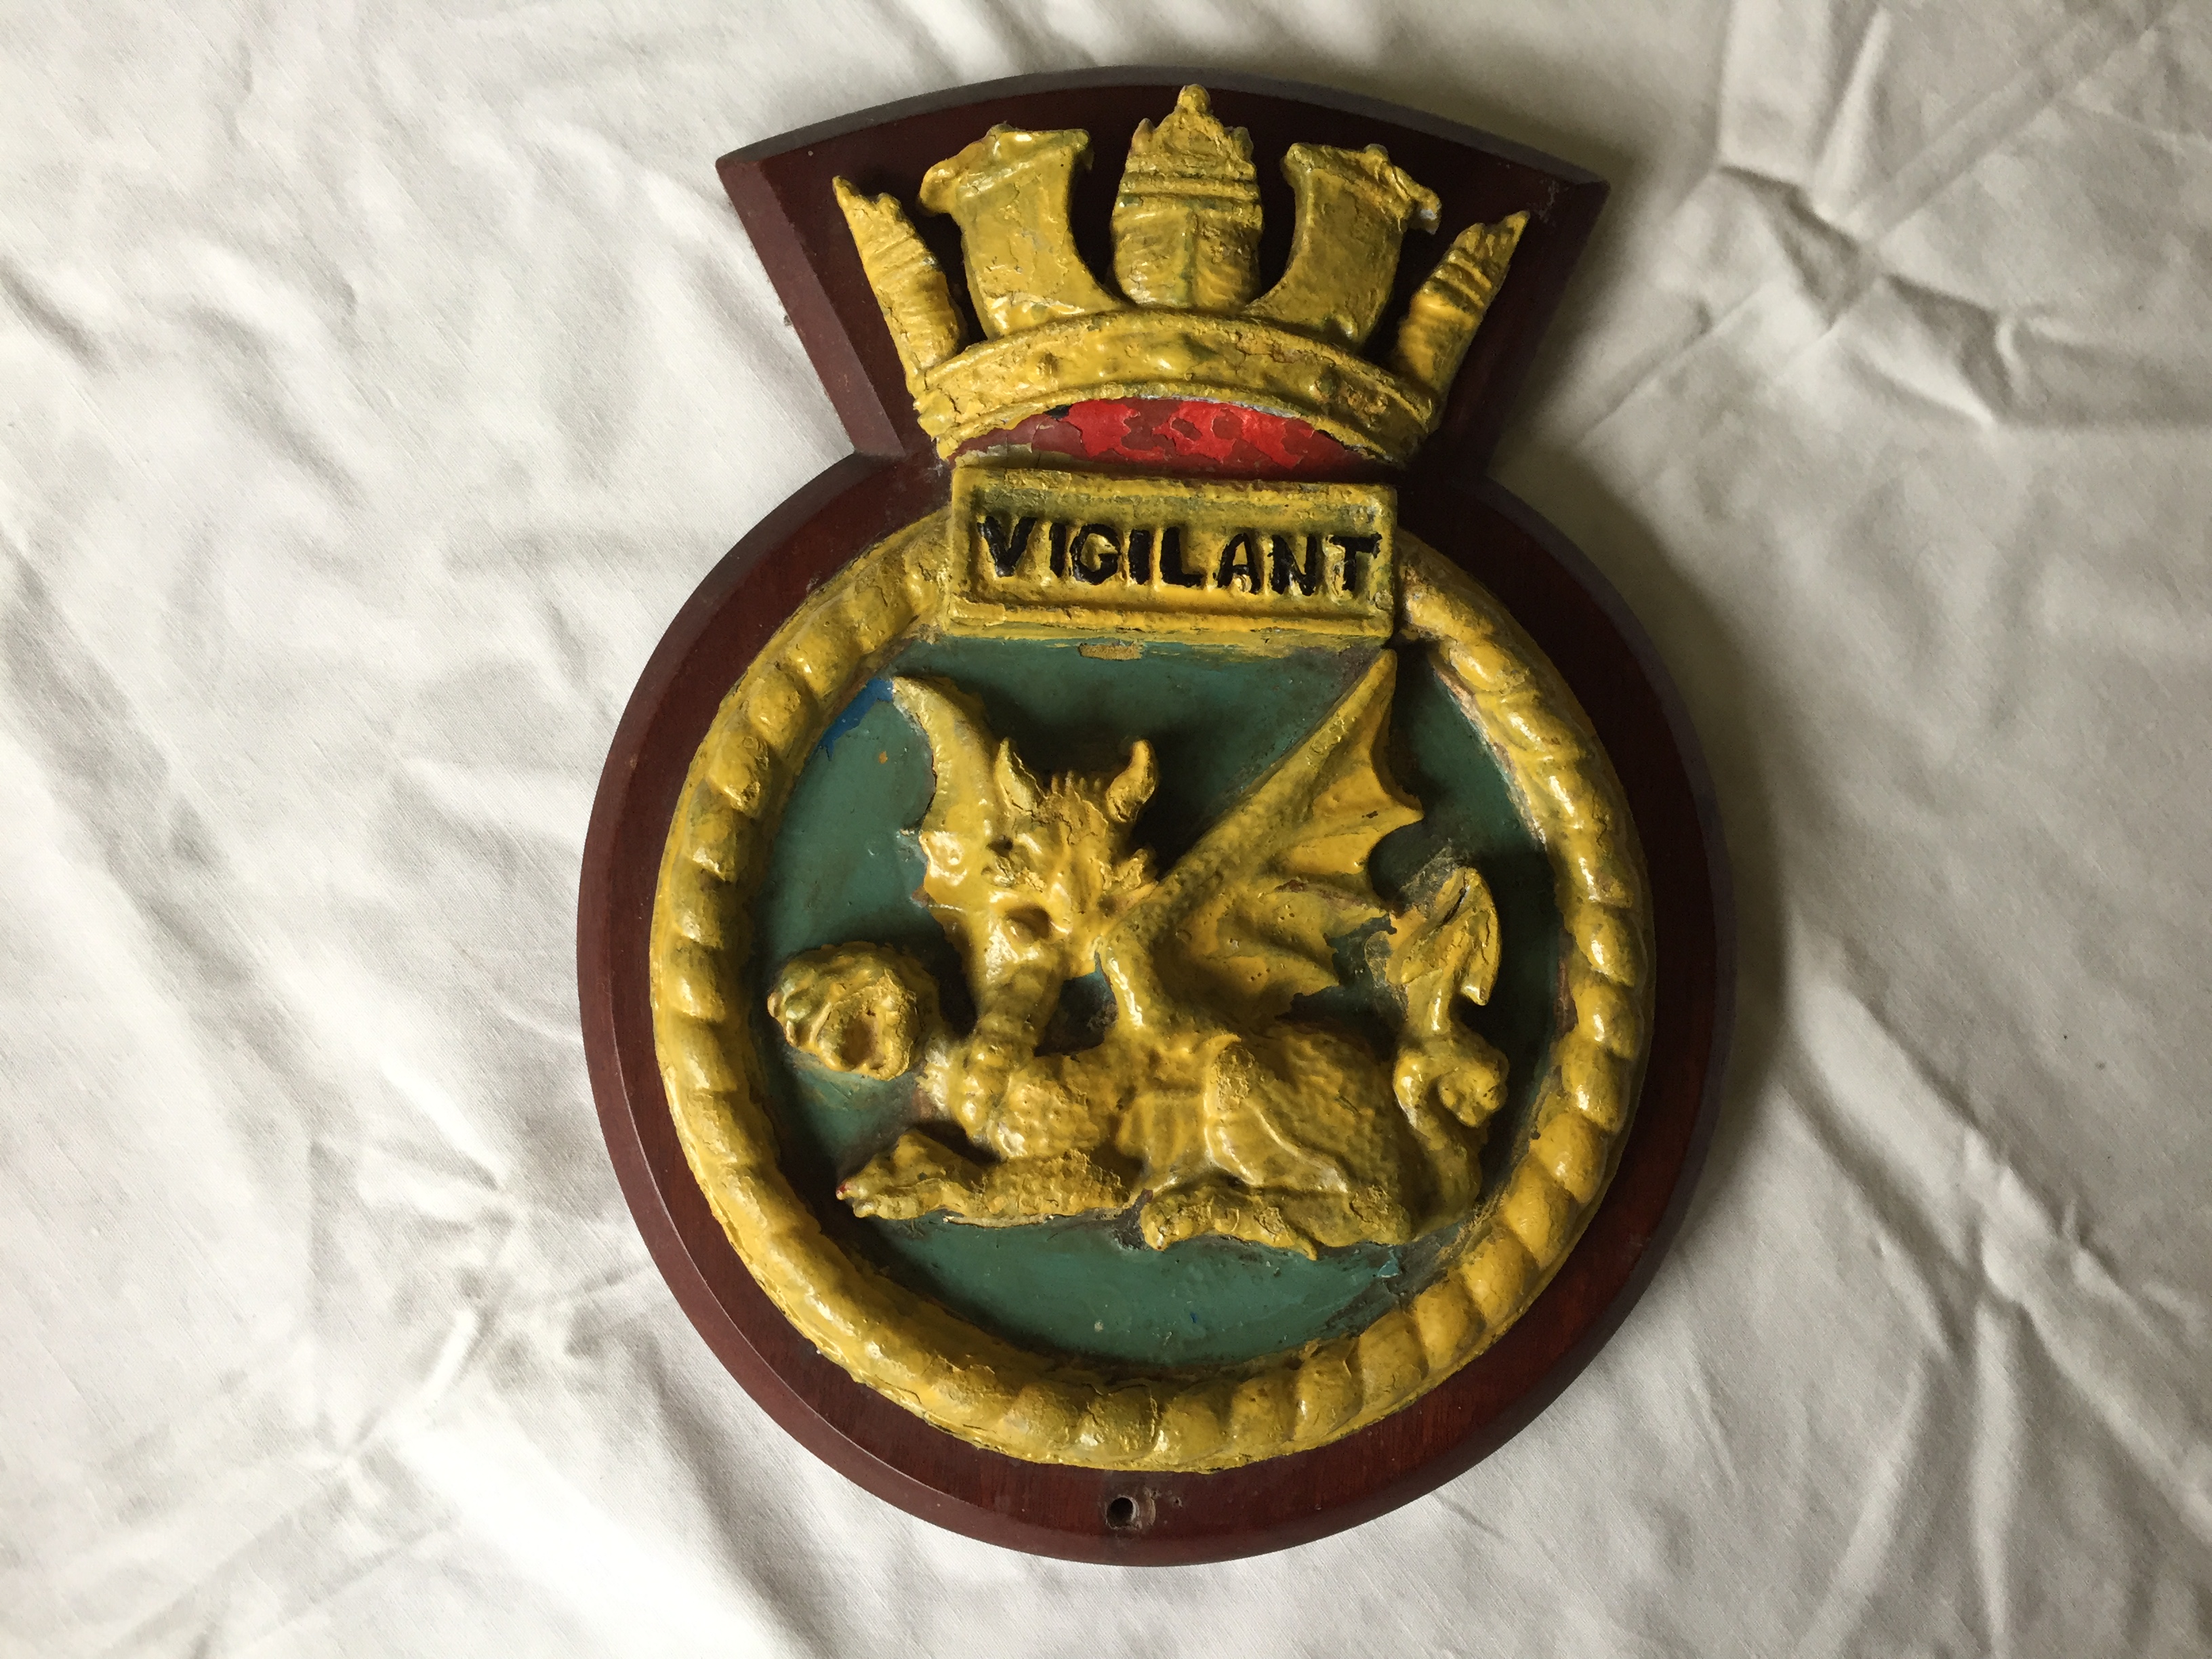 VERY RARE SHIPS ONBOARD PLAQUE FROM HE ROYAL NAVAL DESTROYER VIGILANT  